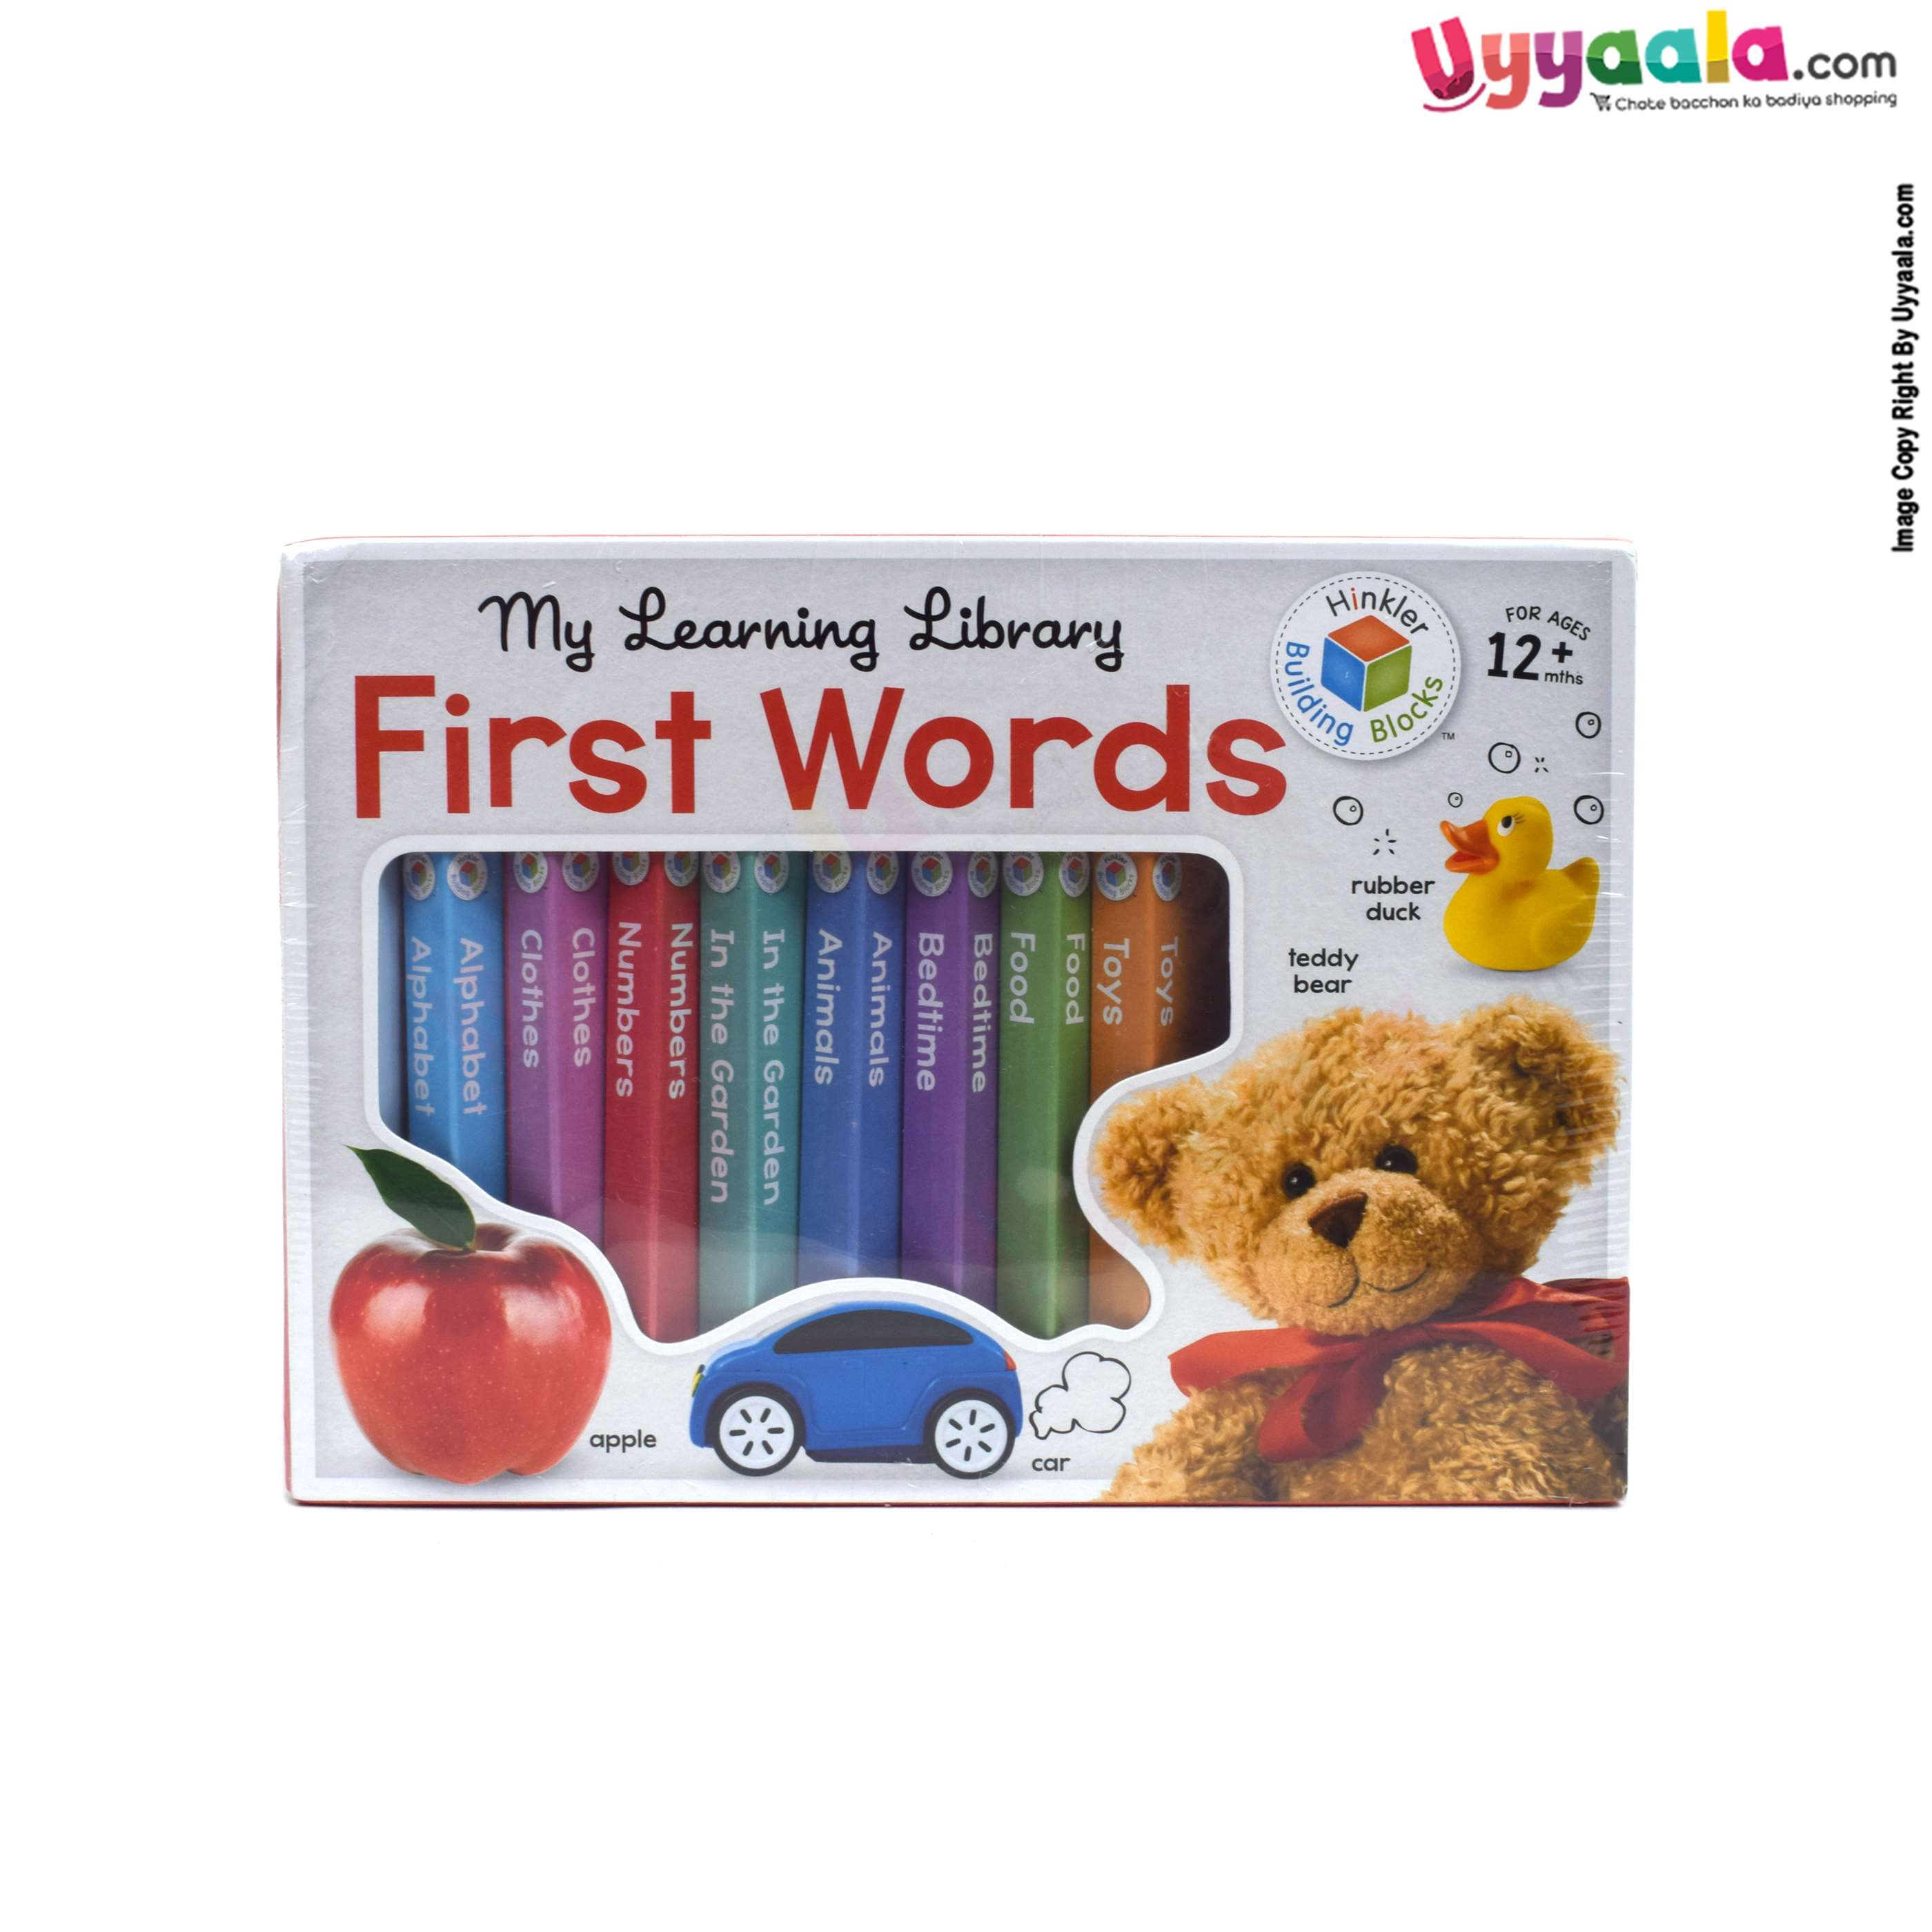 HINKLER Building blocks, my learning library - first words, pack of 8 - 8 volumes, 12 + months